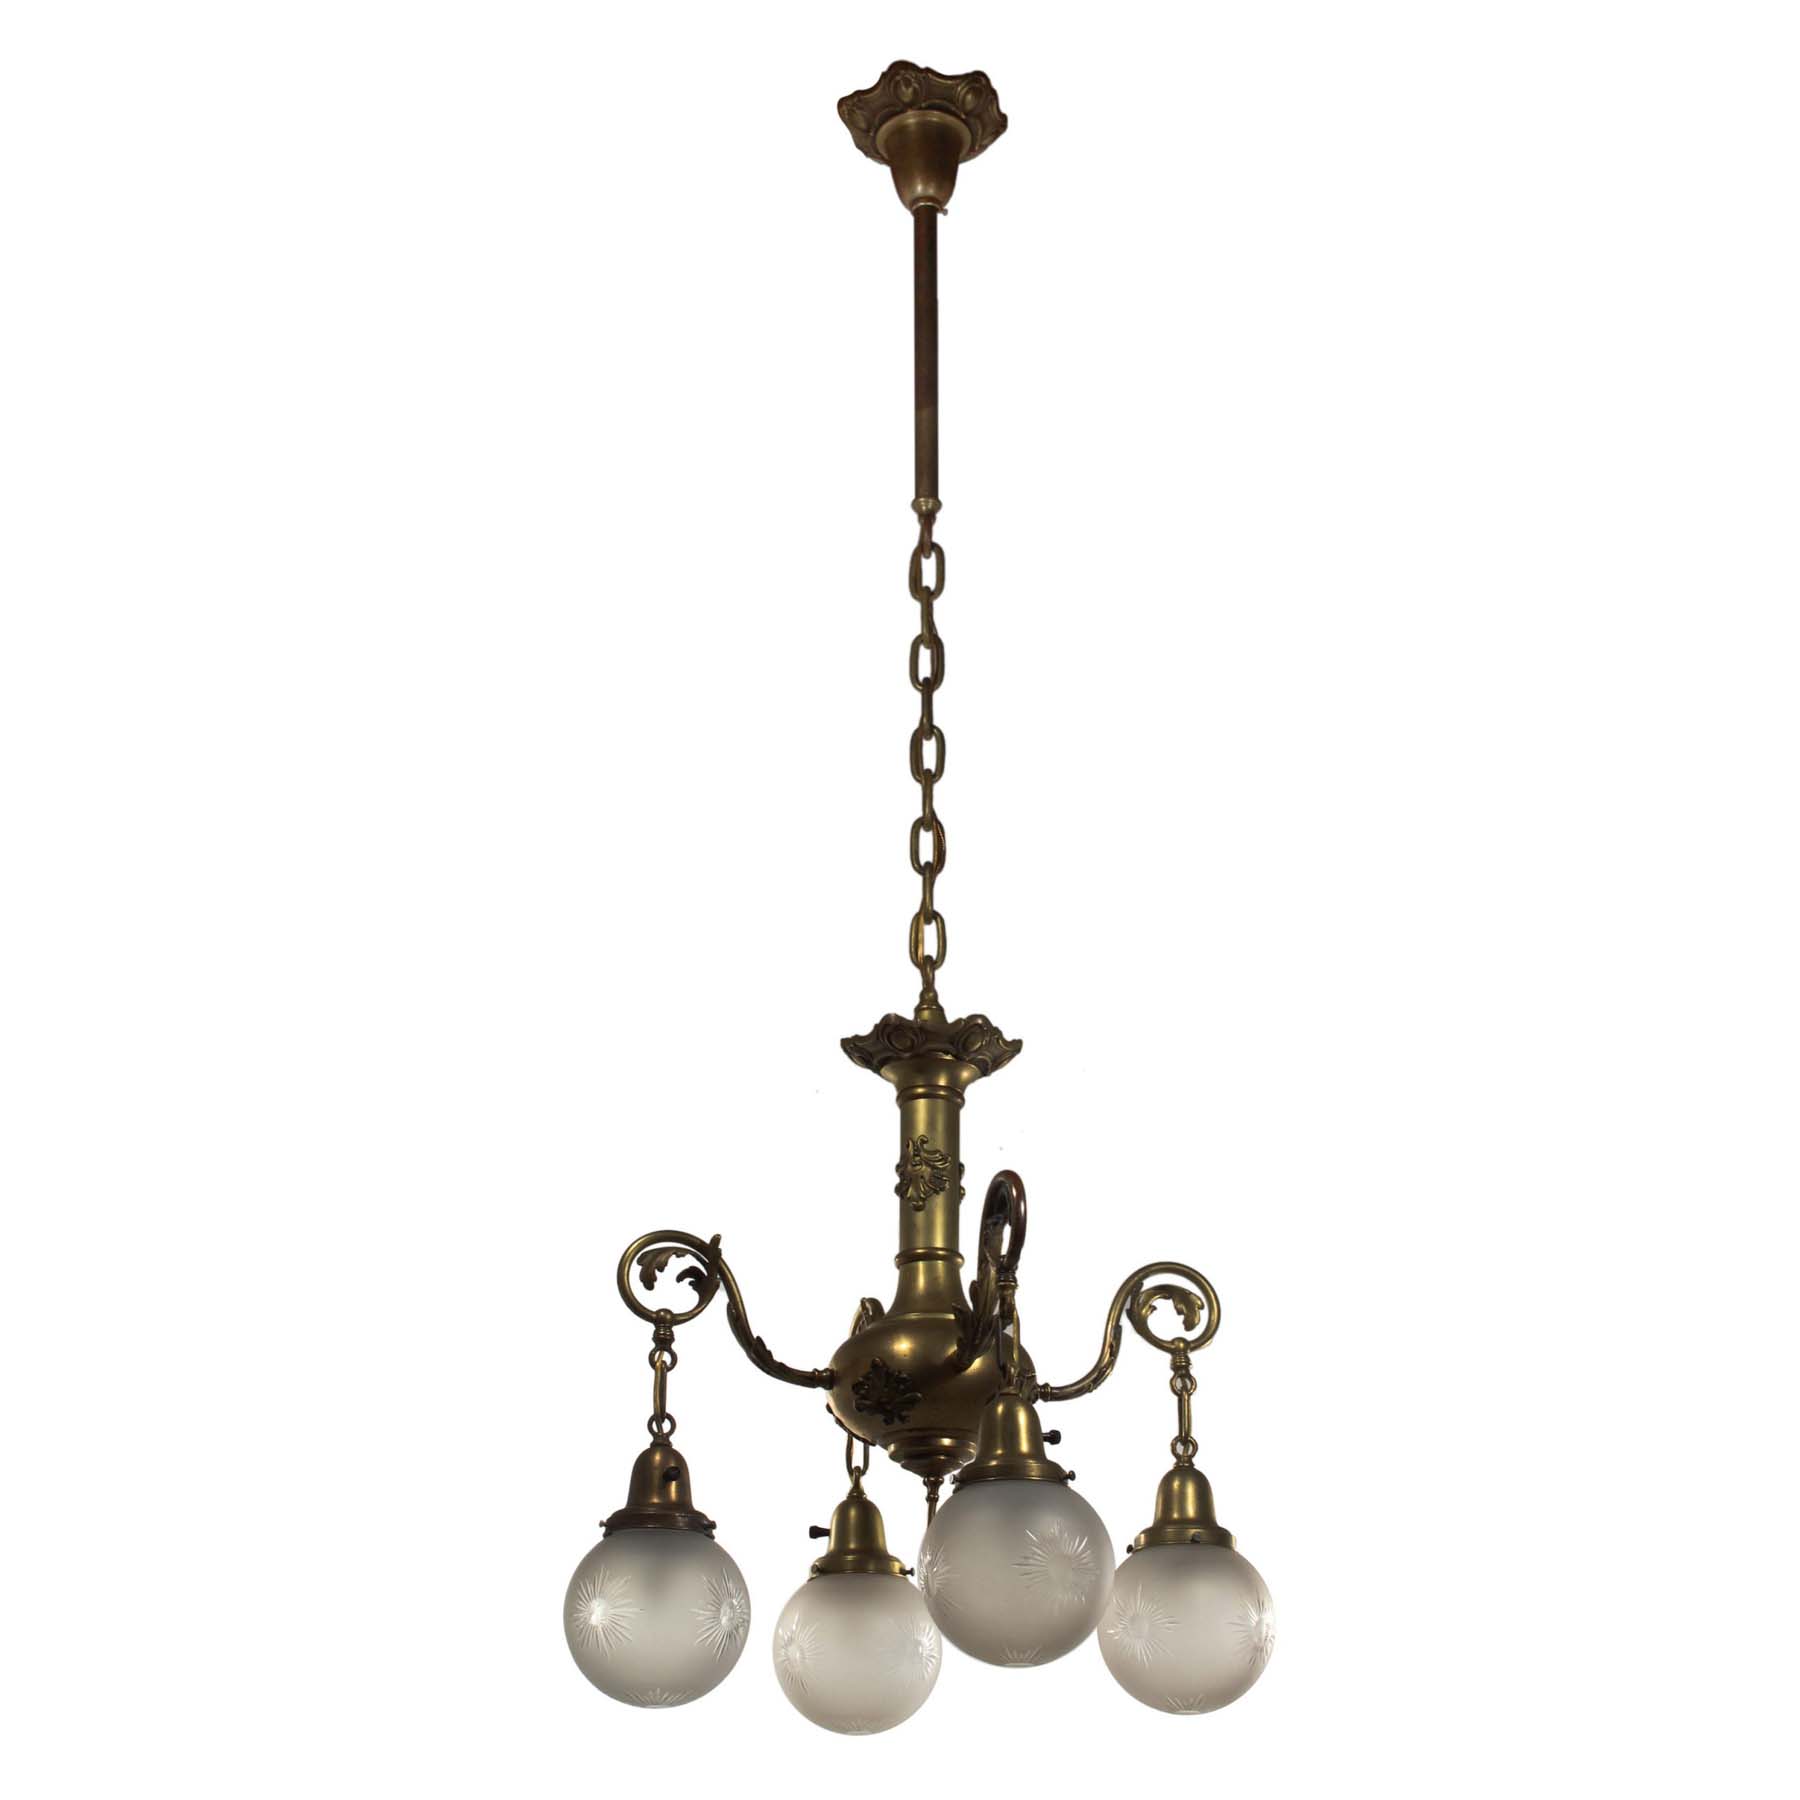 SOLD Neoclassical Chandelier with Wheel Cut Shades, Antique Lighting-67077